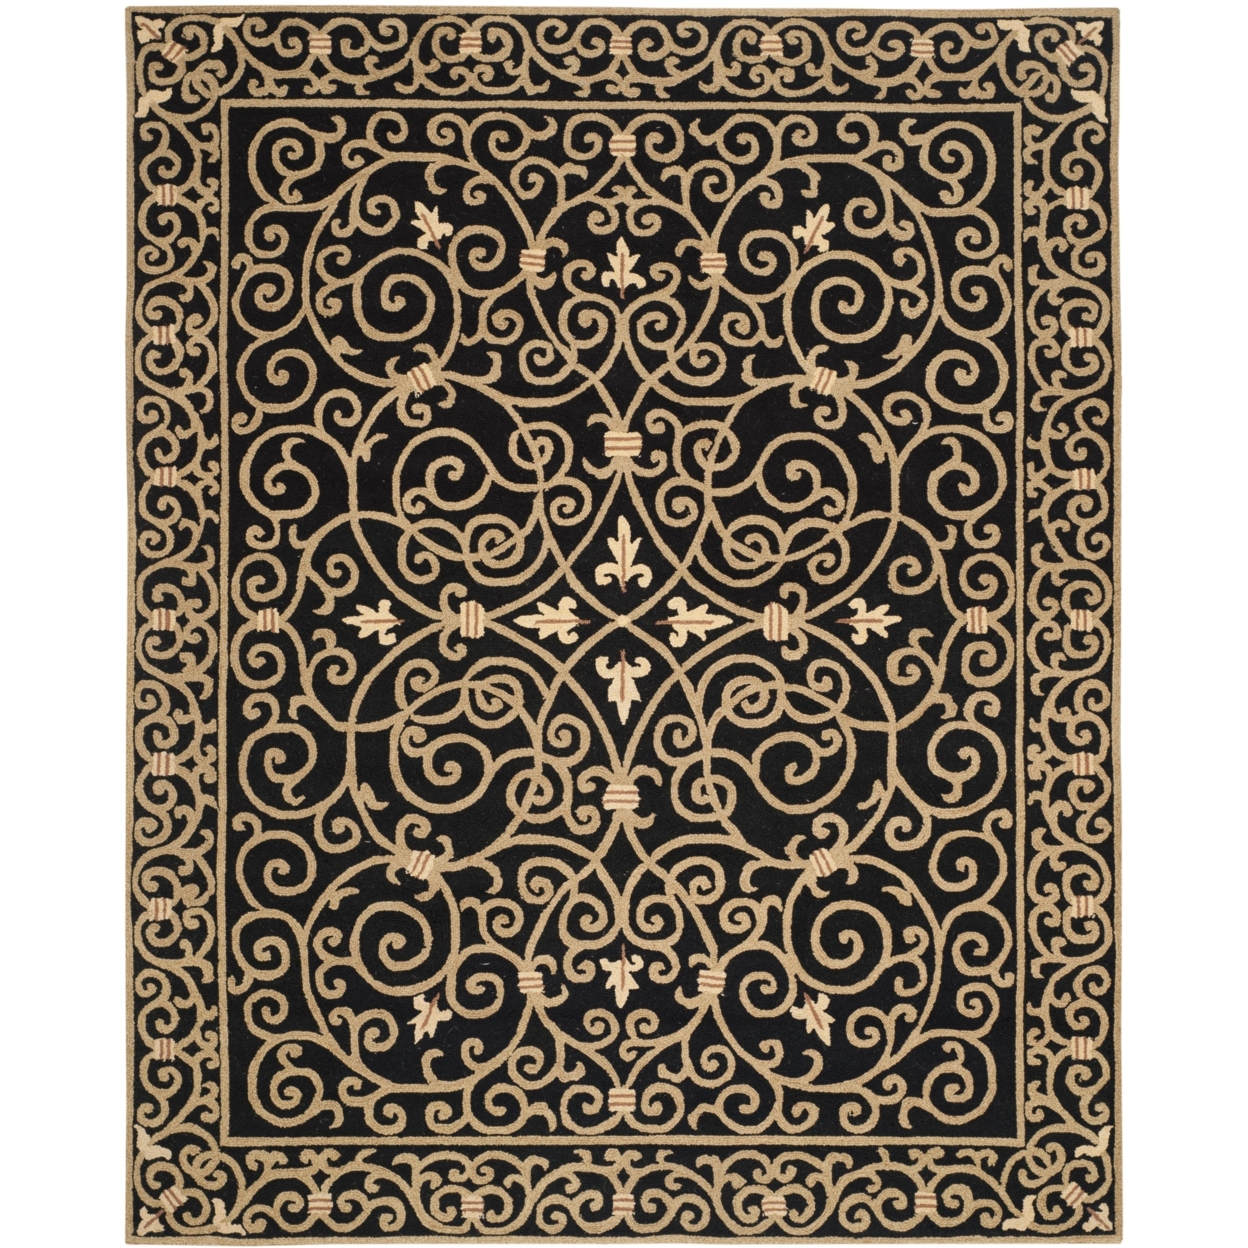 SAFAVIEH Chelsea Collection HK11A Hand-hooked Black Rug - 6' X 9'